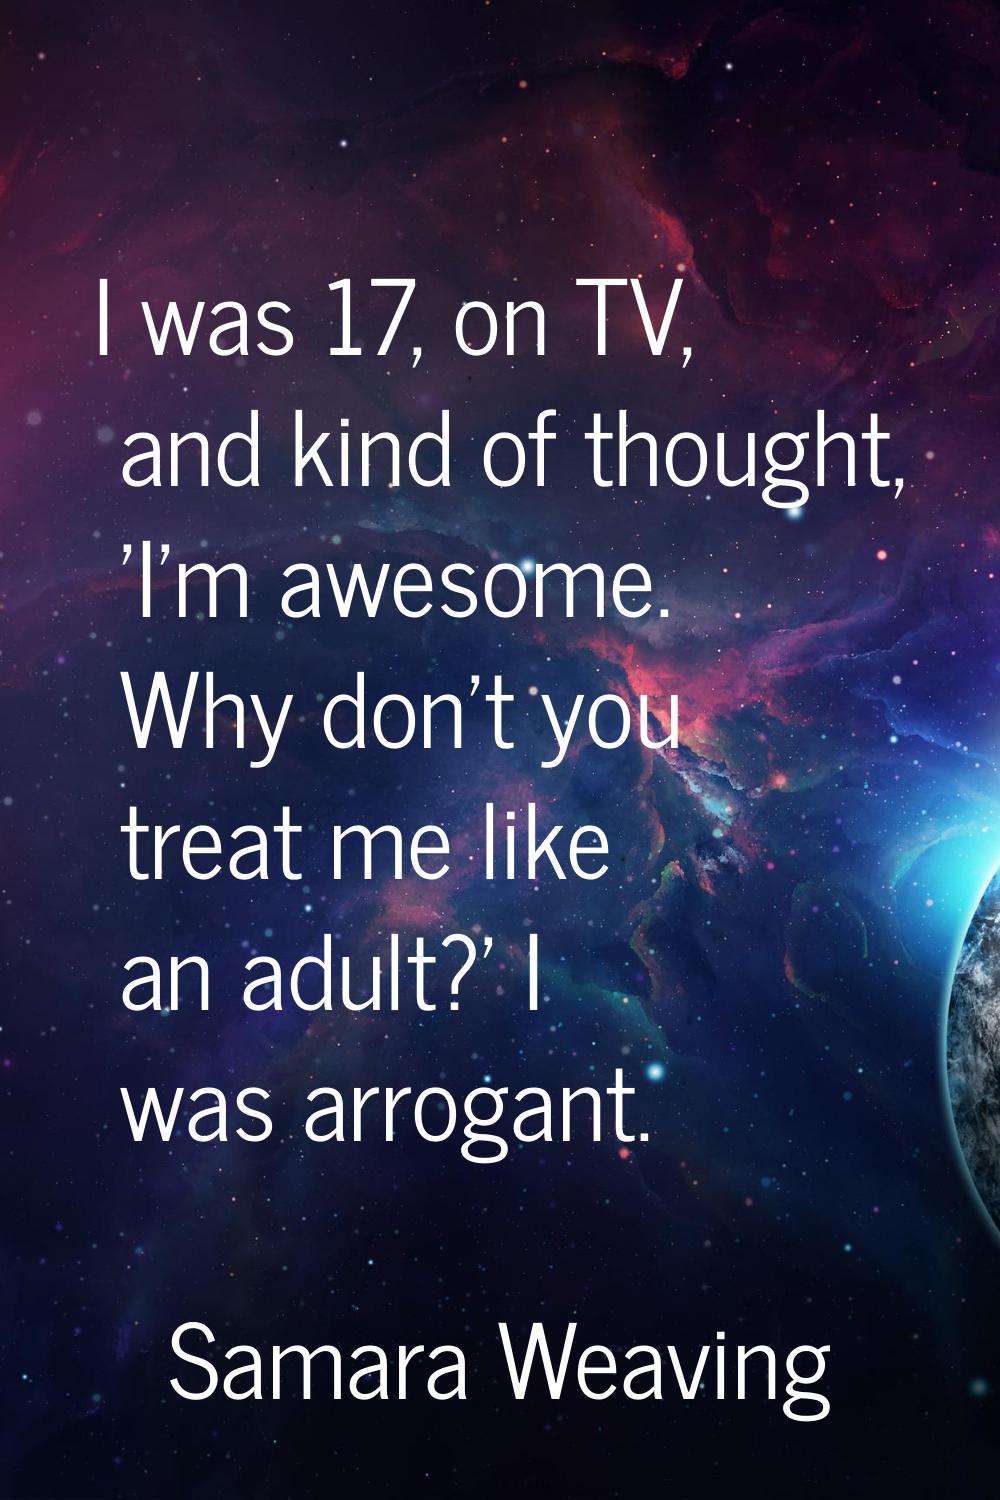 I was 17, on TV, and kind of thought, 'I'm awesome. Why don't you treat me like an adult?' I was ar